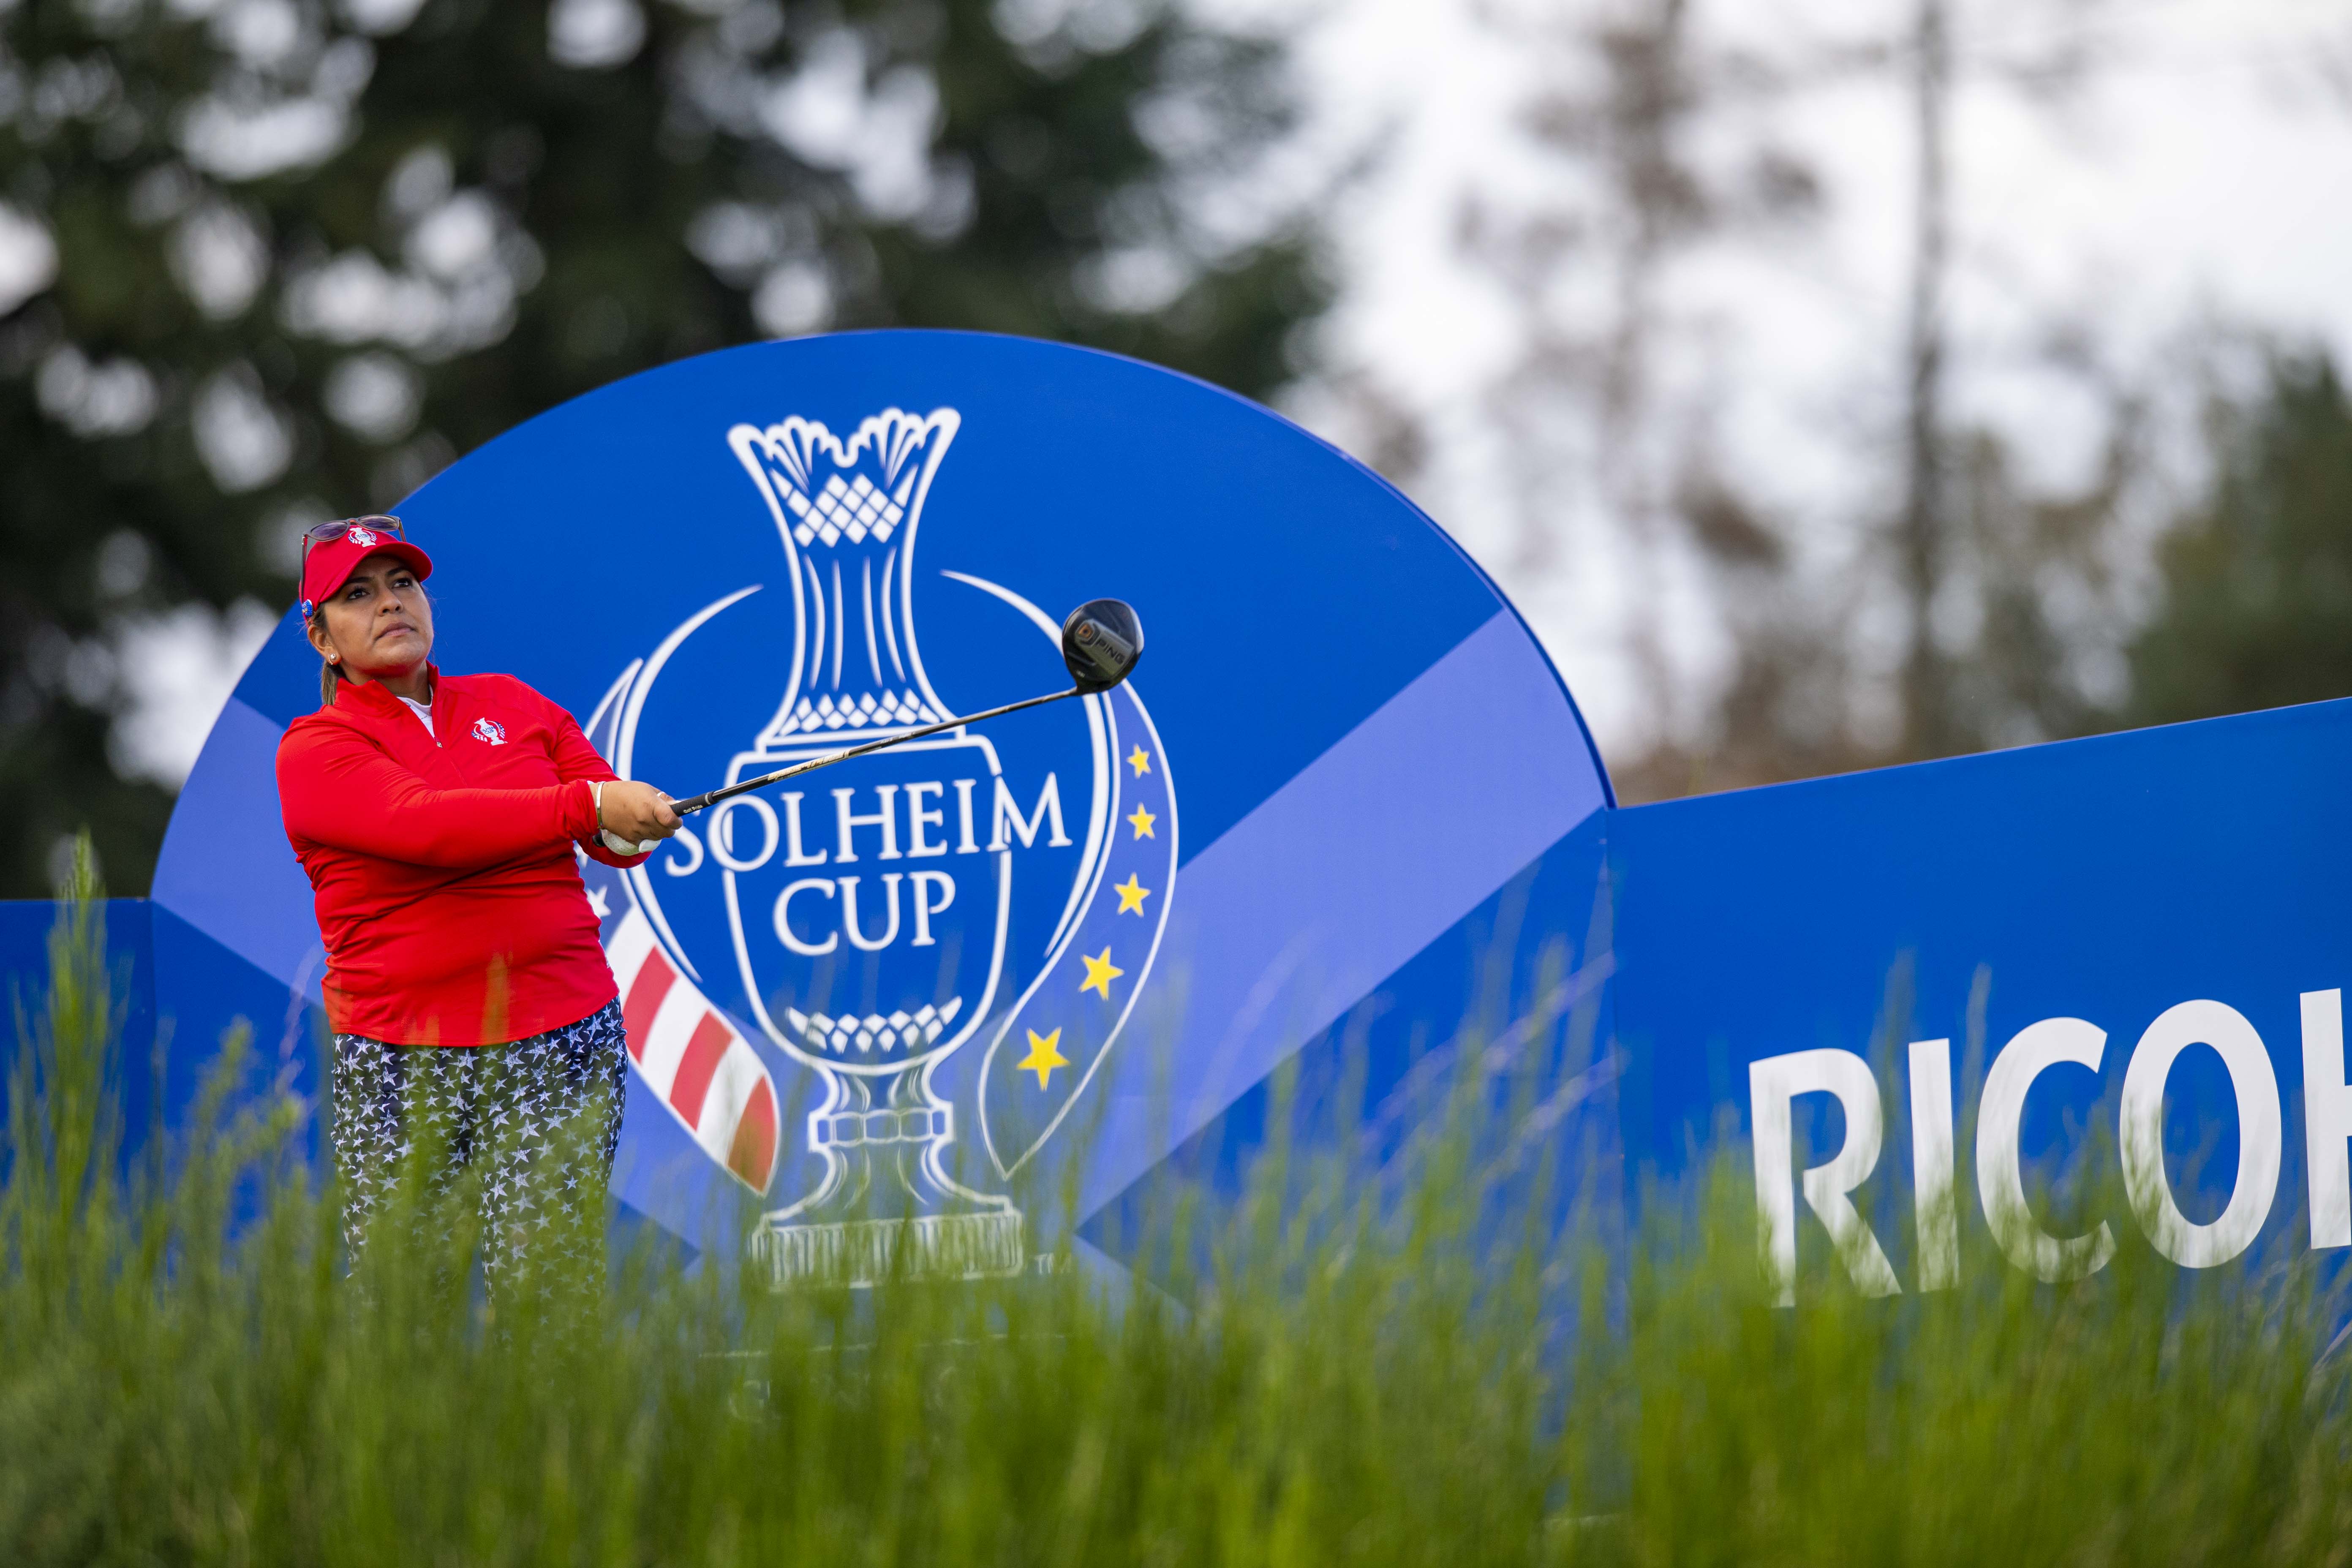 The USA's Lizette Salas was the only player to get a bad time warning despite slow play issues at the Solheim Cup.